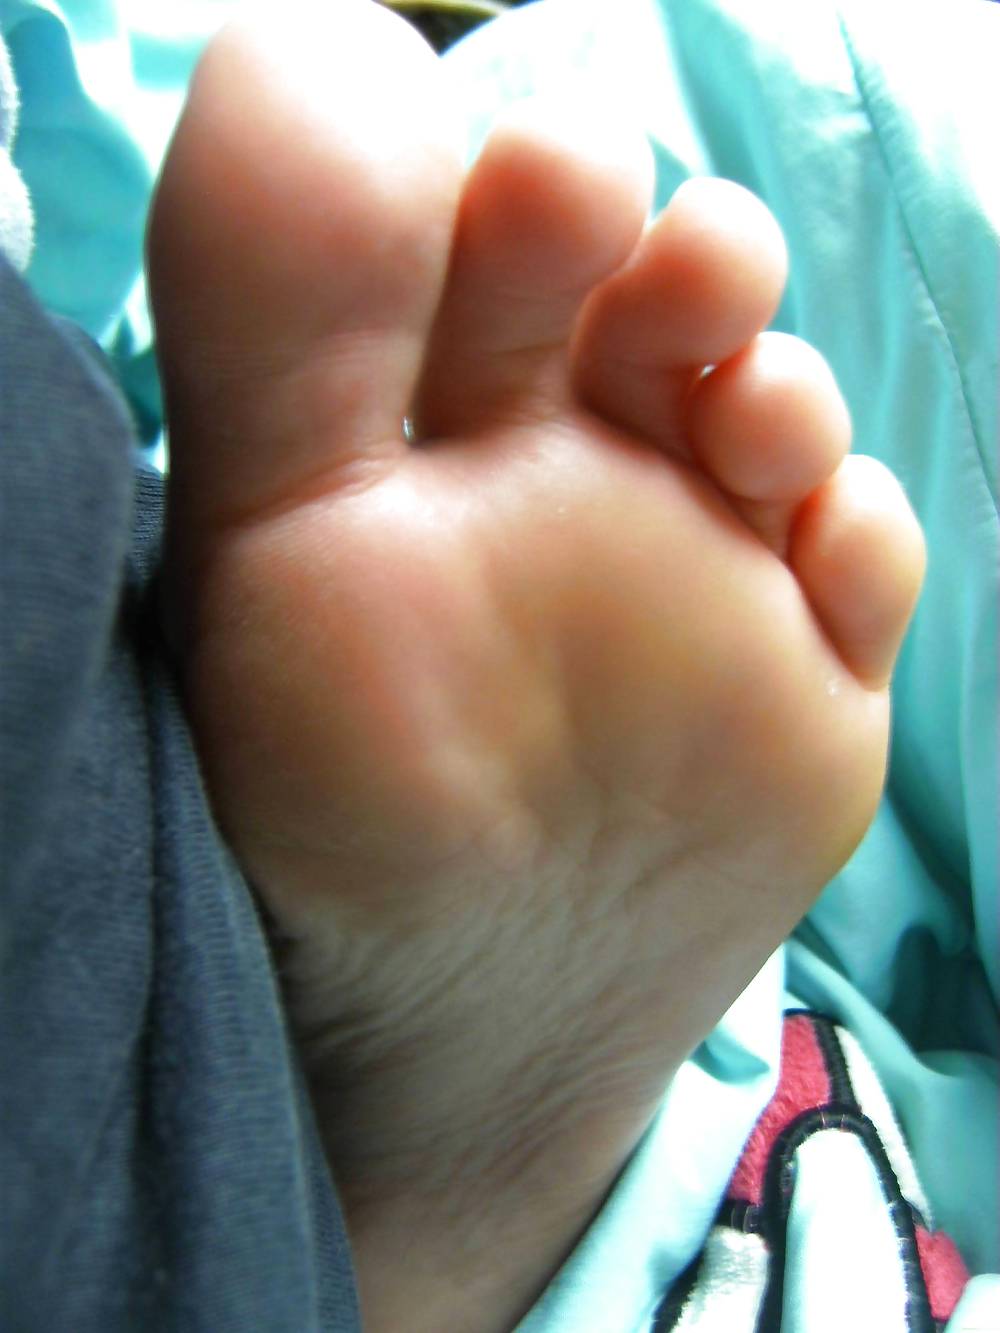 Sex Gallery Vicky 's Feet - Foot Model with smooth soles